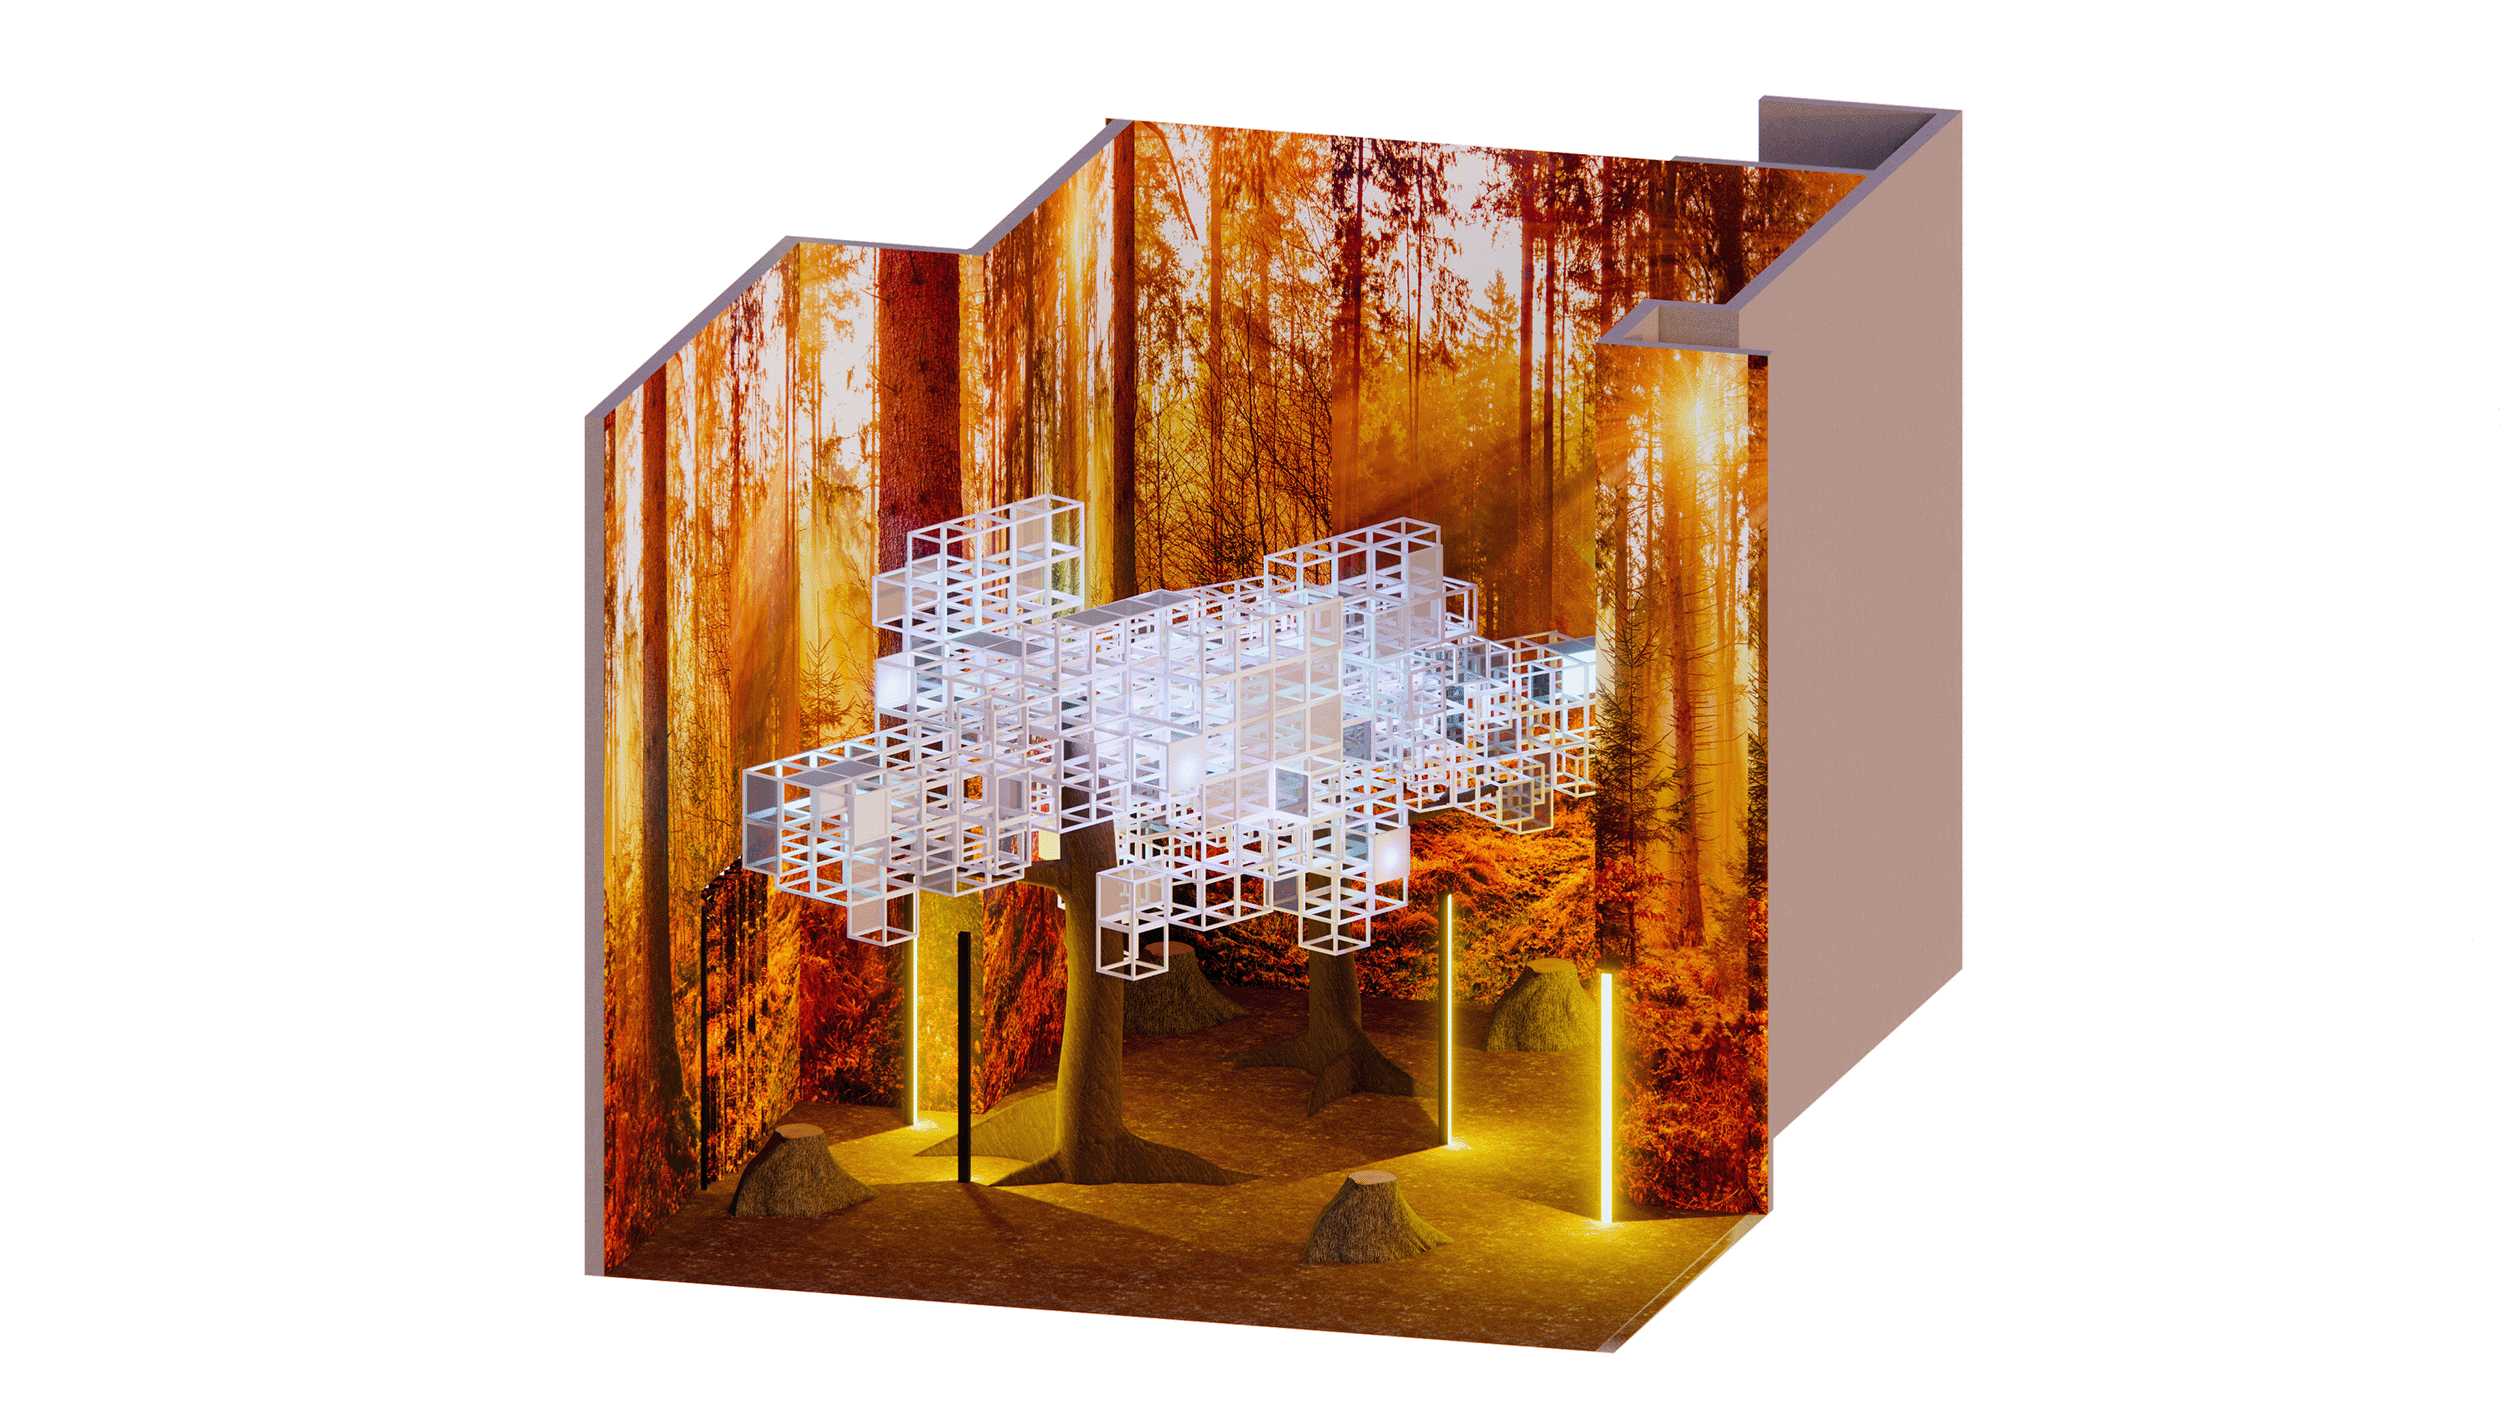 Digital render by Adam Taylor showing VR exhibition. Walls are an orange forest. Space has yellow neon lighting and treets with white cube wireframes for leaves.